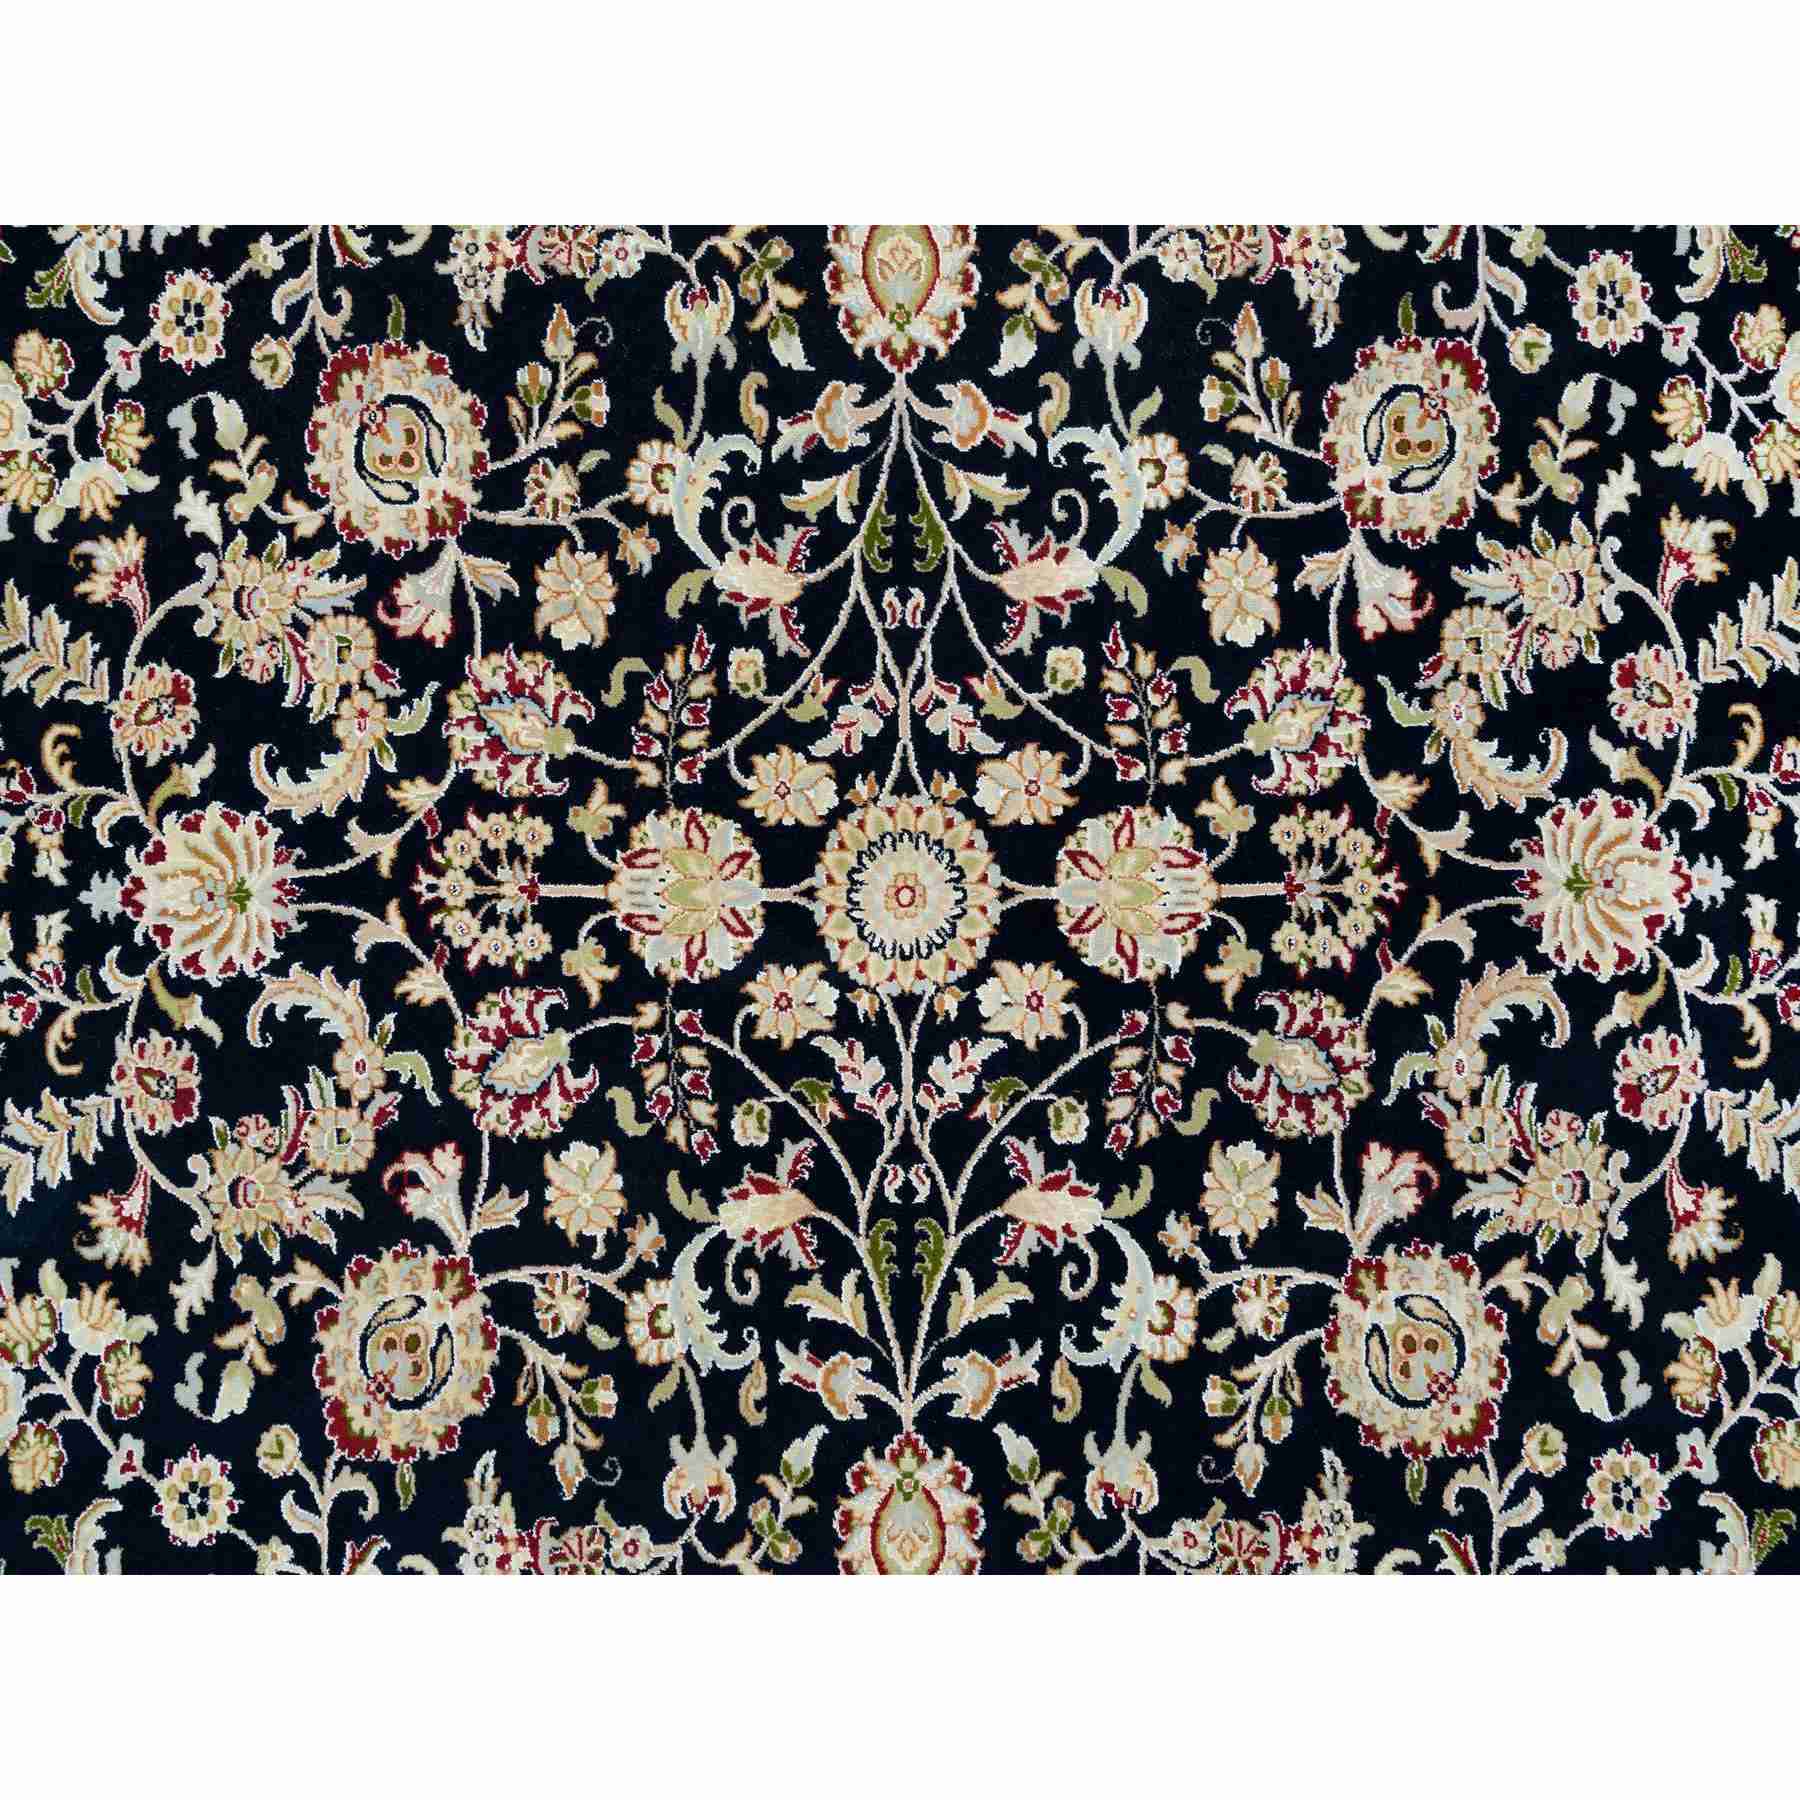 Fine-Oriental-Hand-Knotted-Rug-326810